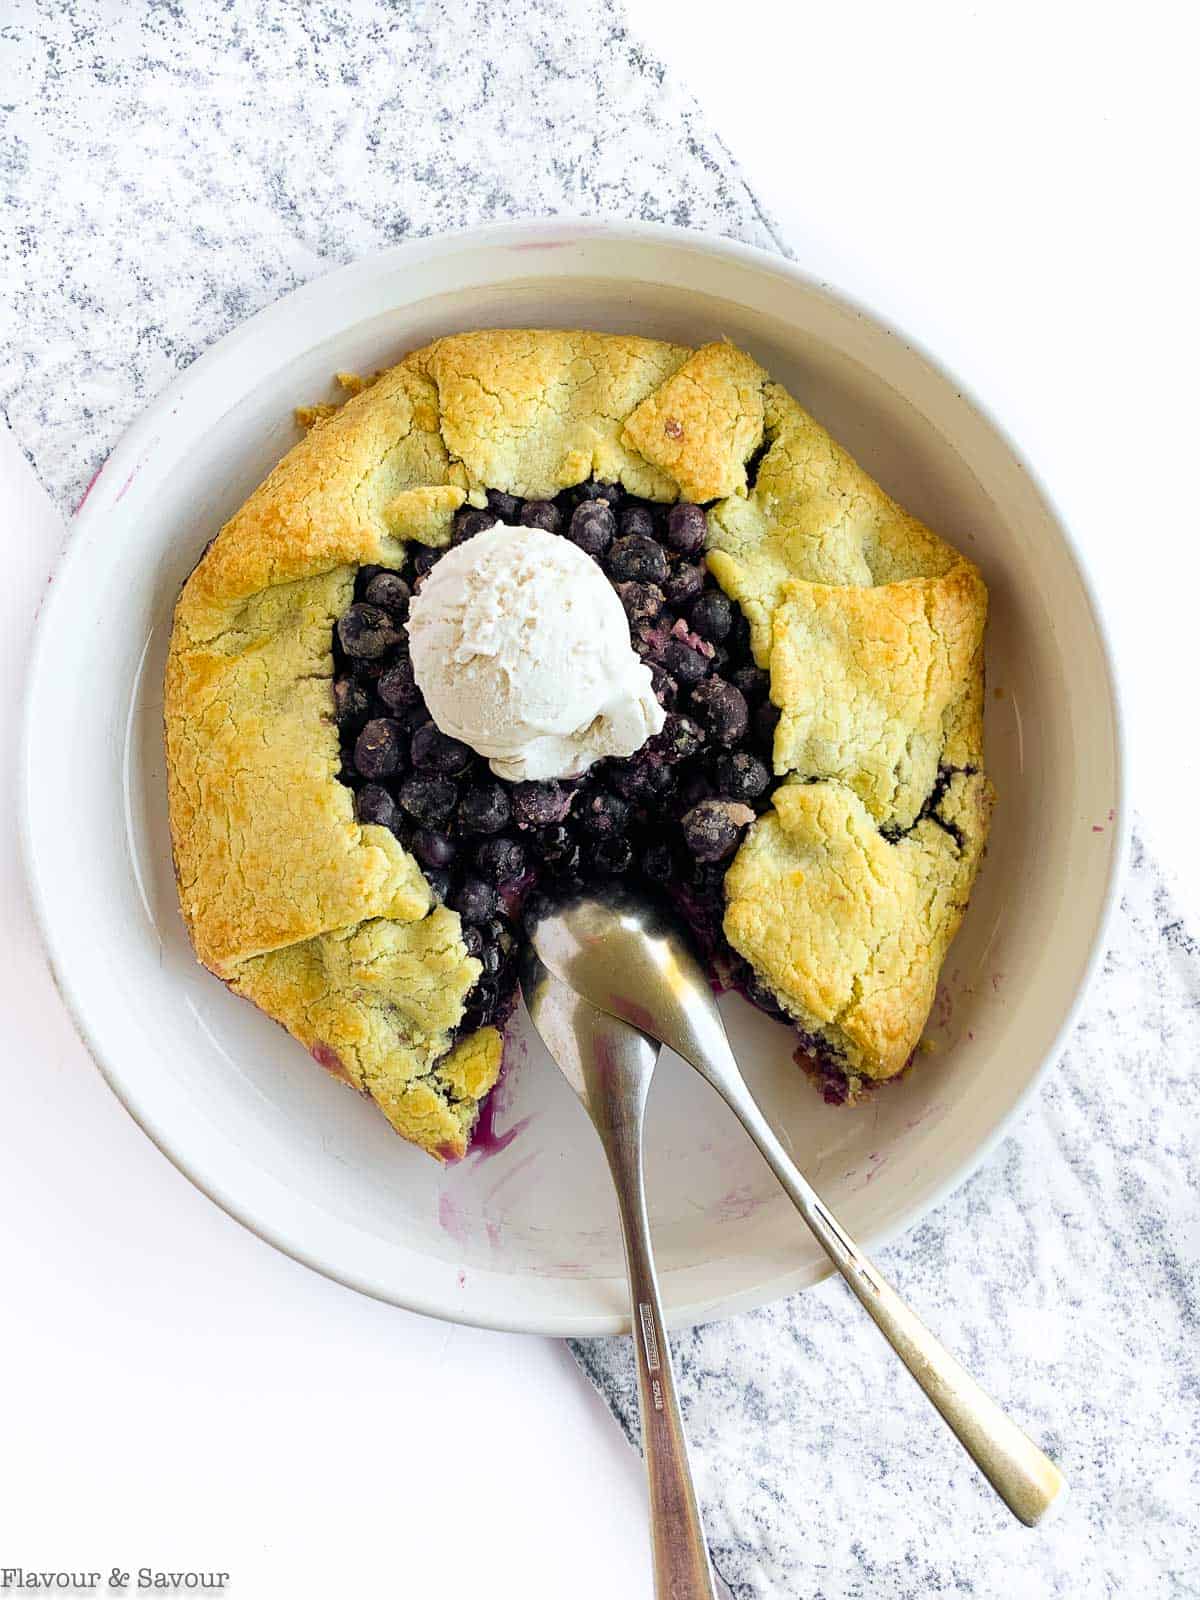 Overhead view of Blueberry Lemon Ginger Galette with a scoop of ice cream and two spoons